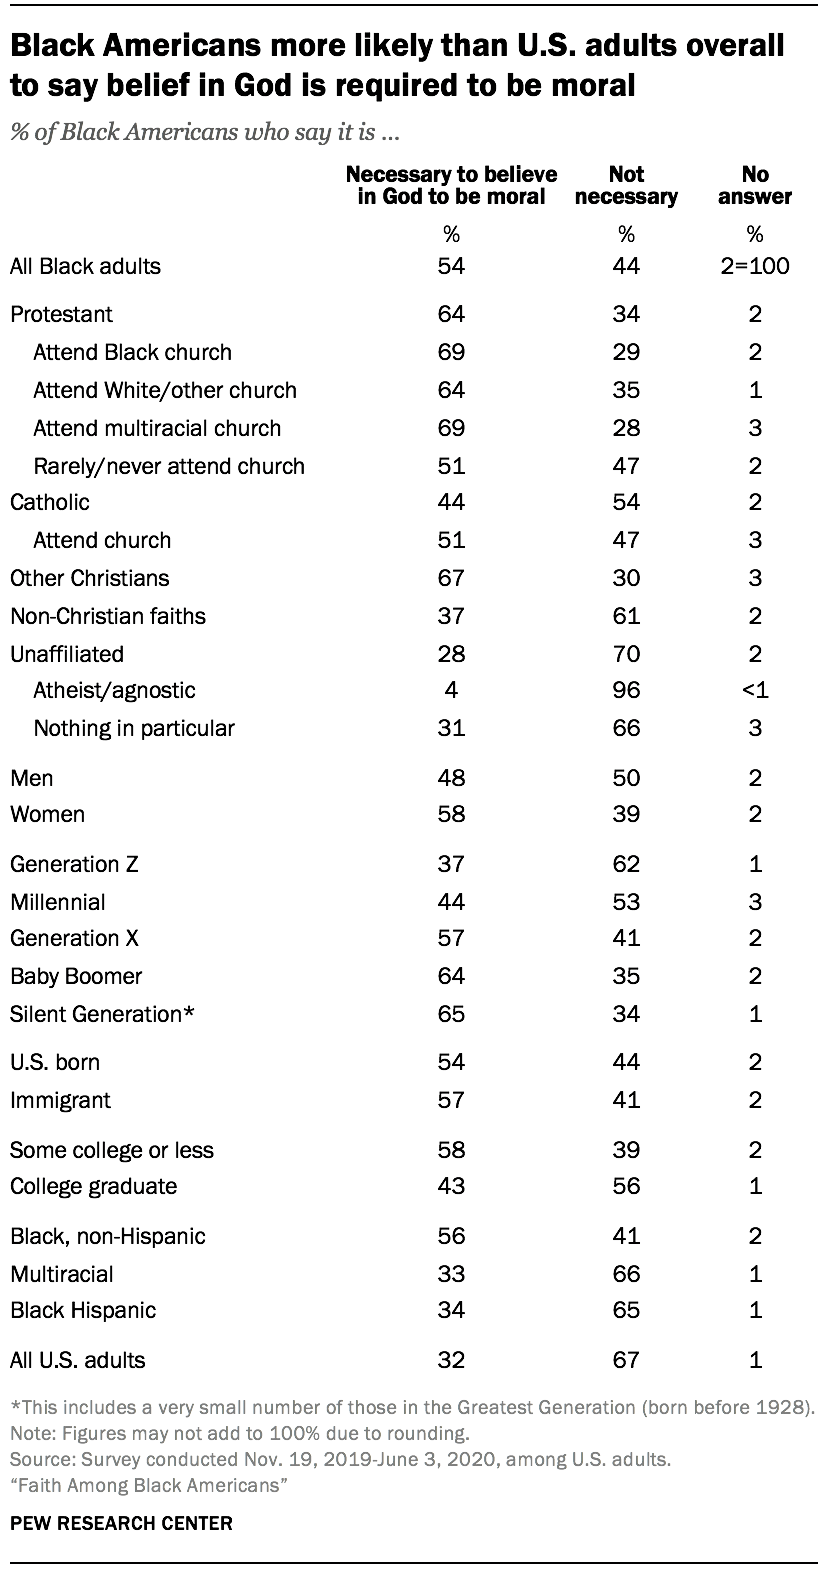 Black Americans more likely than U.S. adults overall to say belief in God is required to be moral